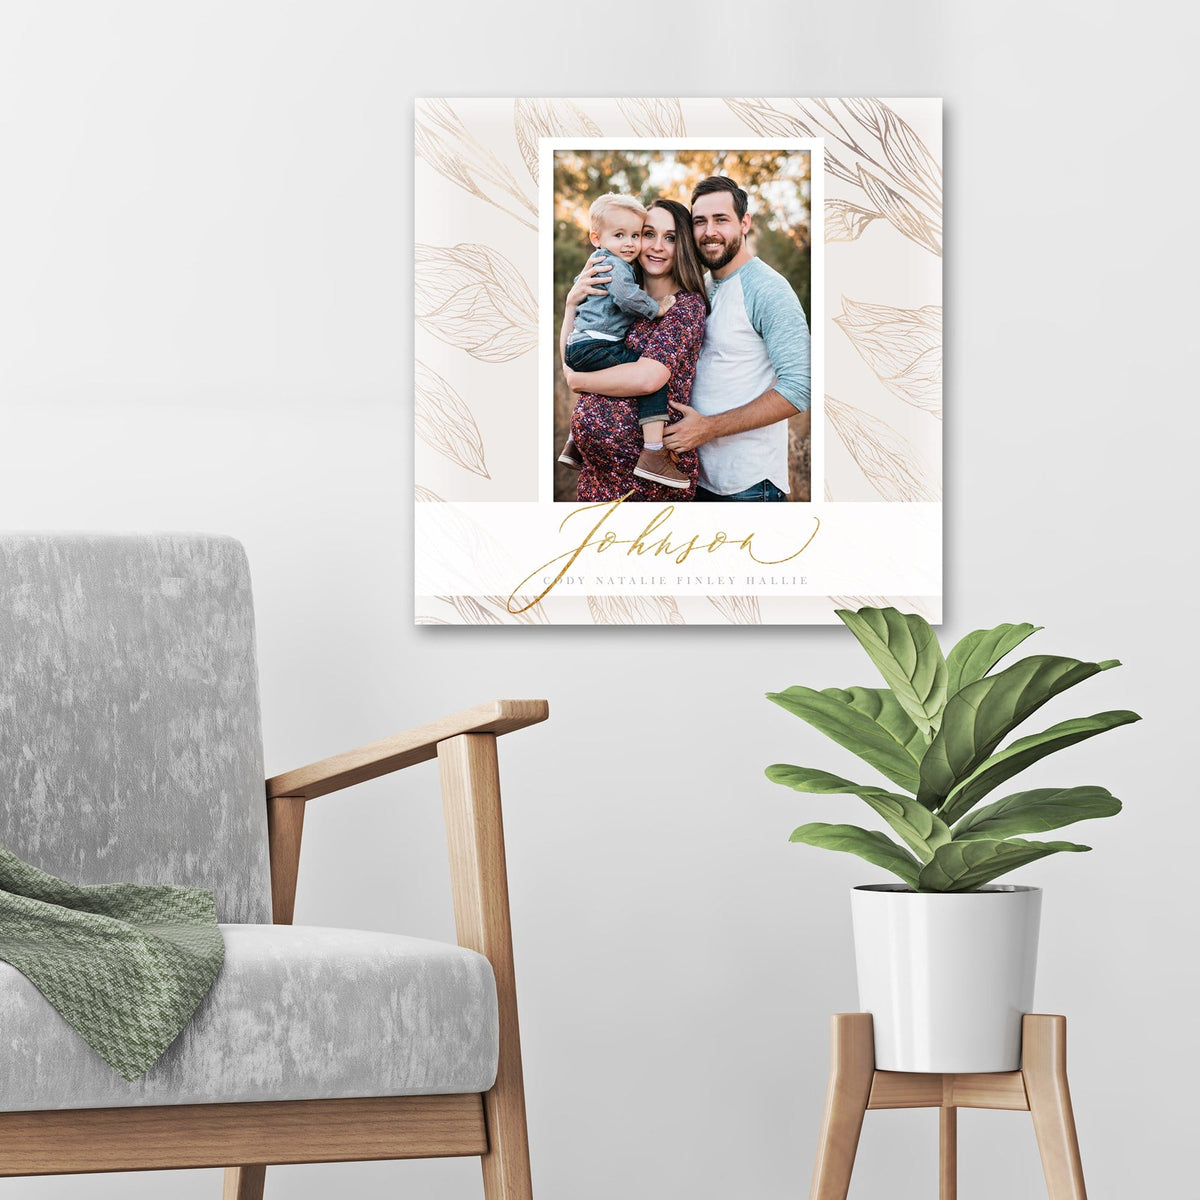 Personalized photo wall decor from Personal-Prints